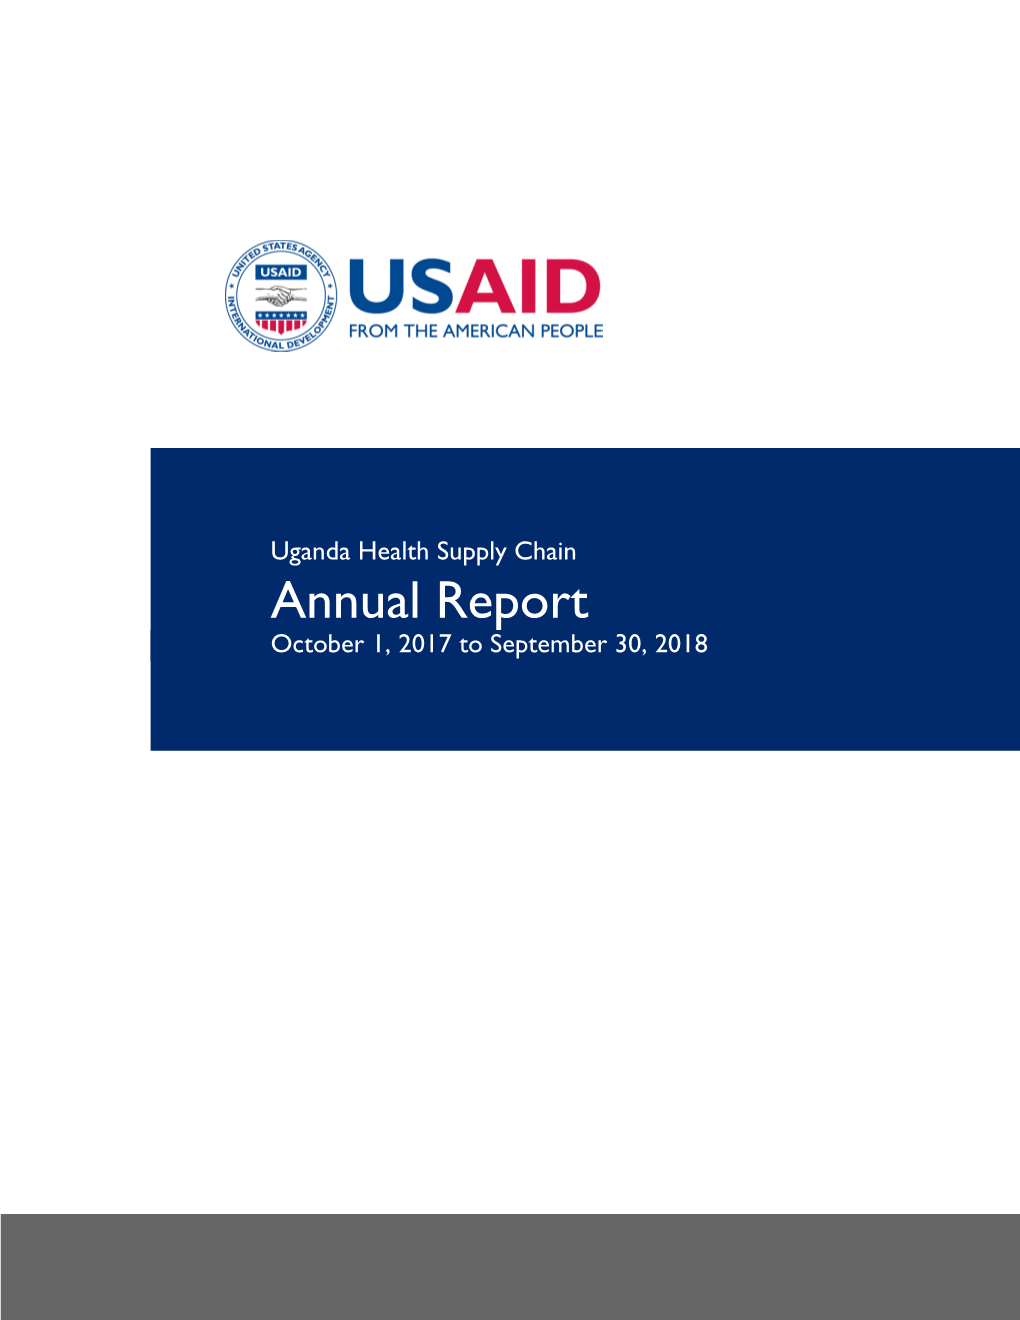 Uganda Health Supply Chain Annual Report October 1, 2017 to September 30, 2018